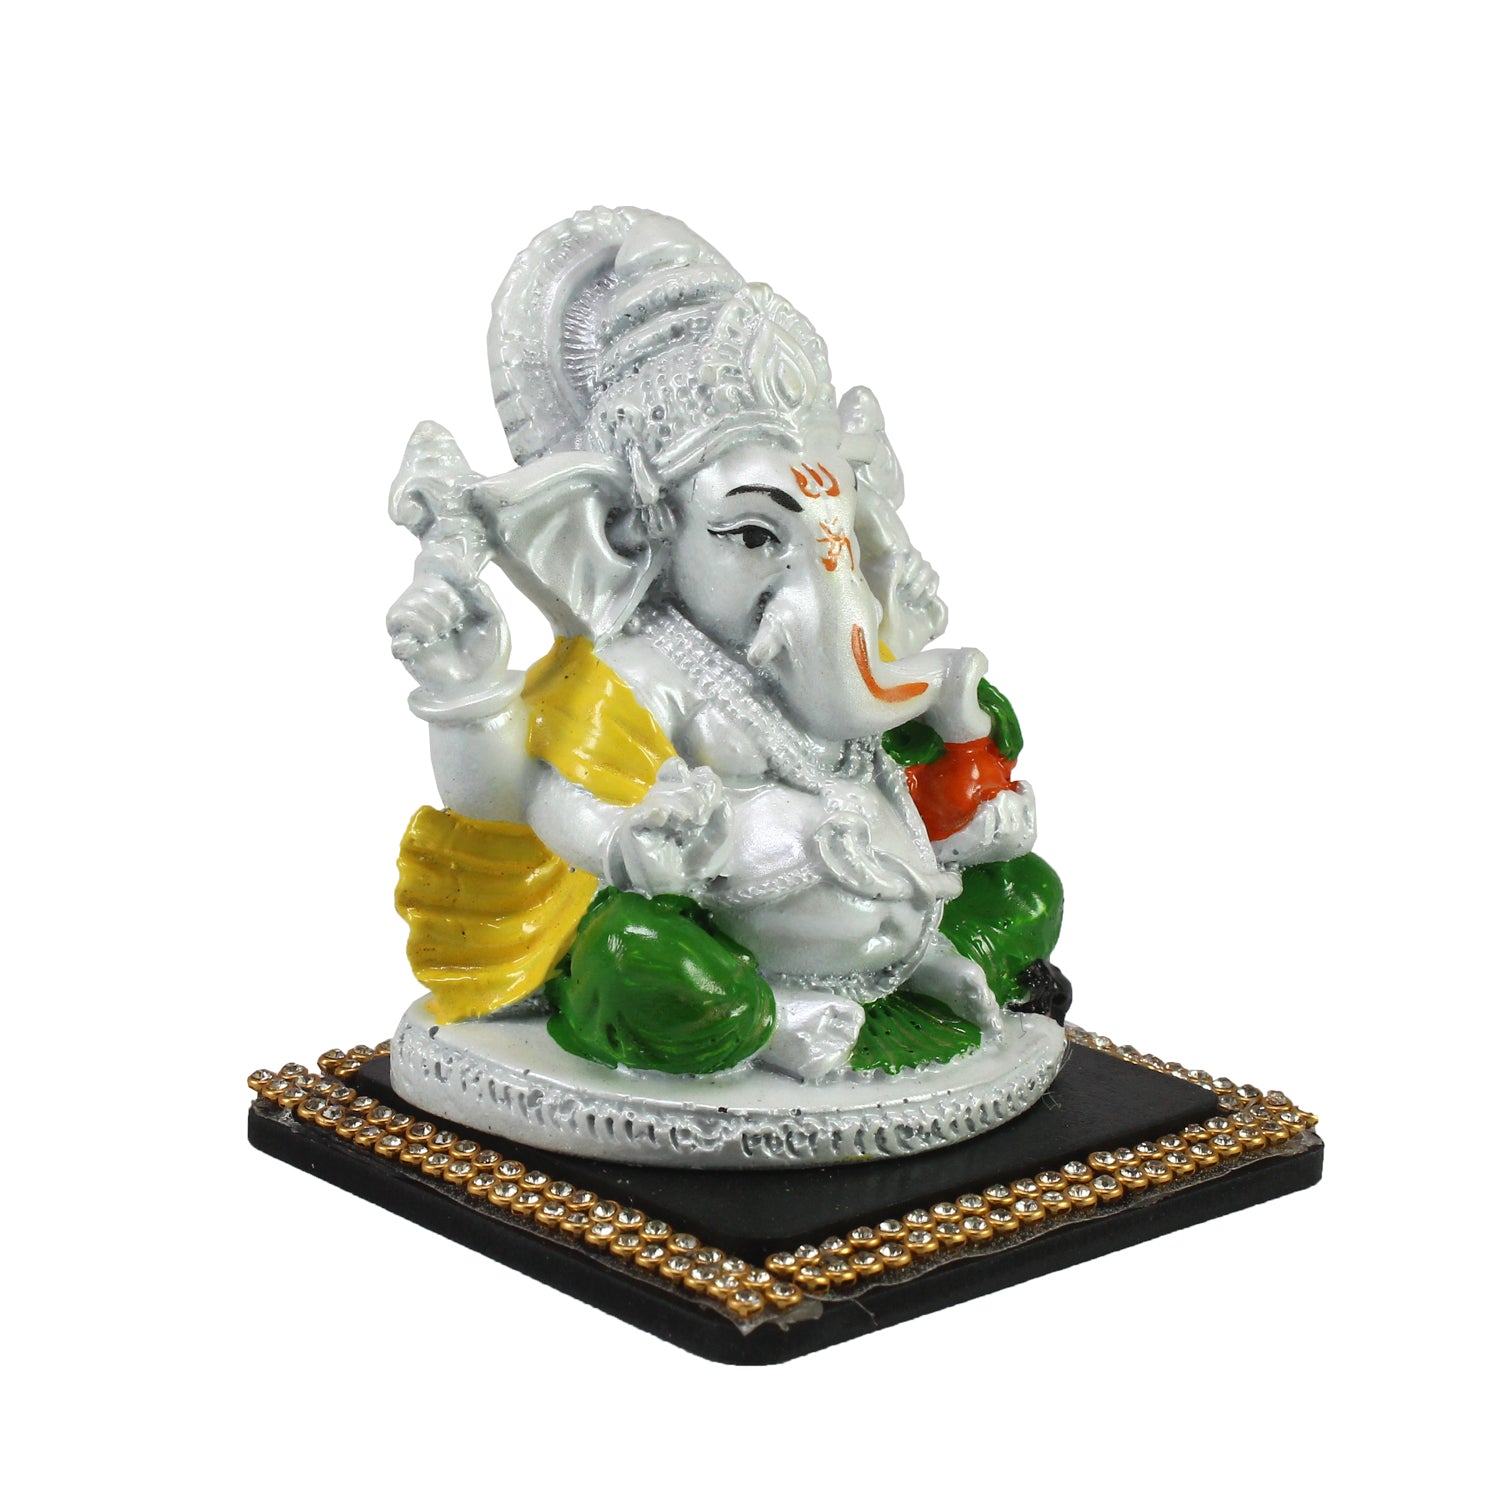 Decorative Lord Ganesha Showpiece for Car Dashboard, Home Temple and Office Desks 3